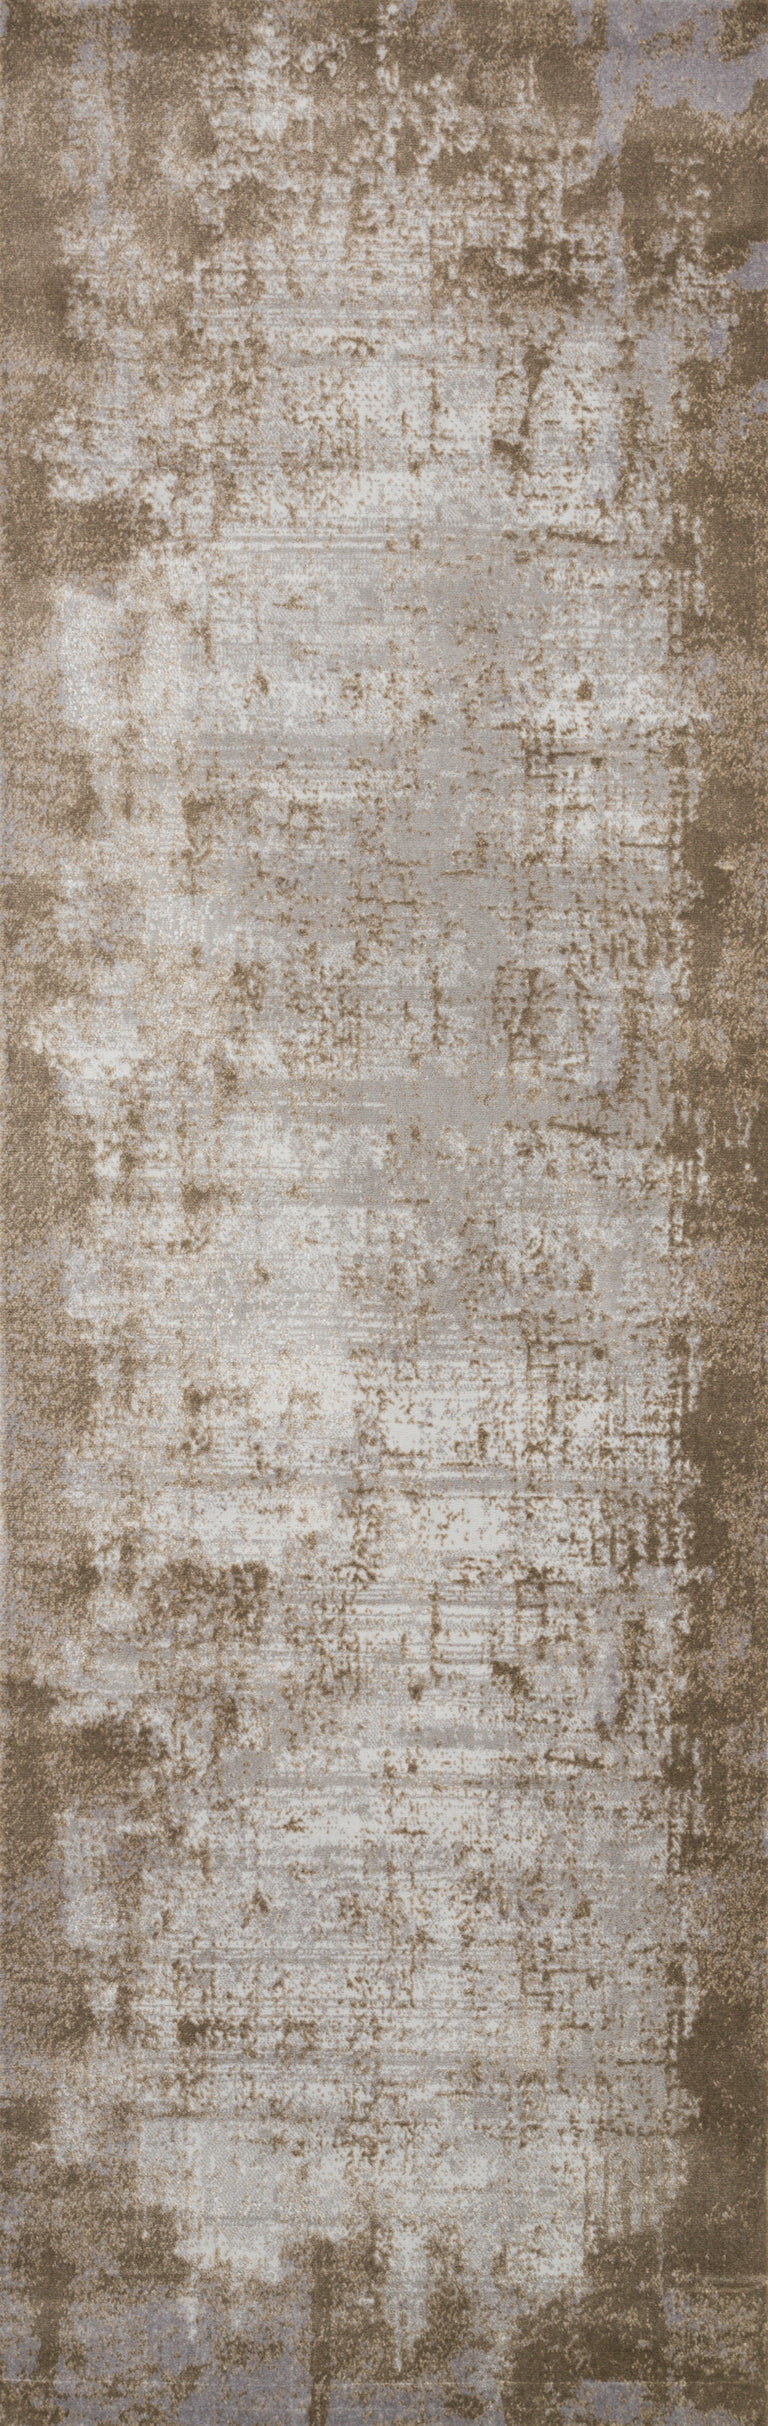 Loloi Rugs Patina Collection Rug in Wheat, Grey - 7'10" x 10'10"